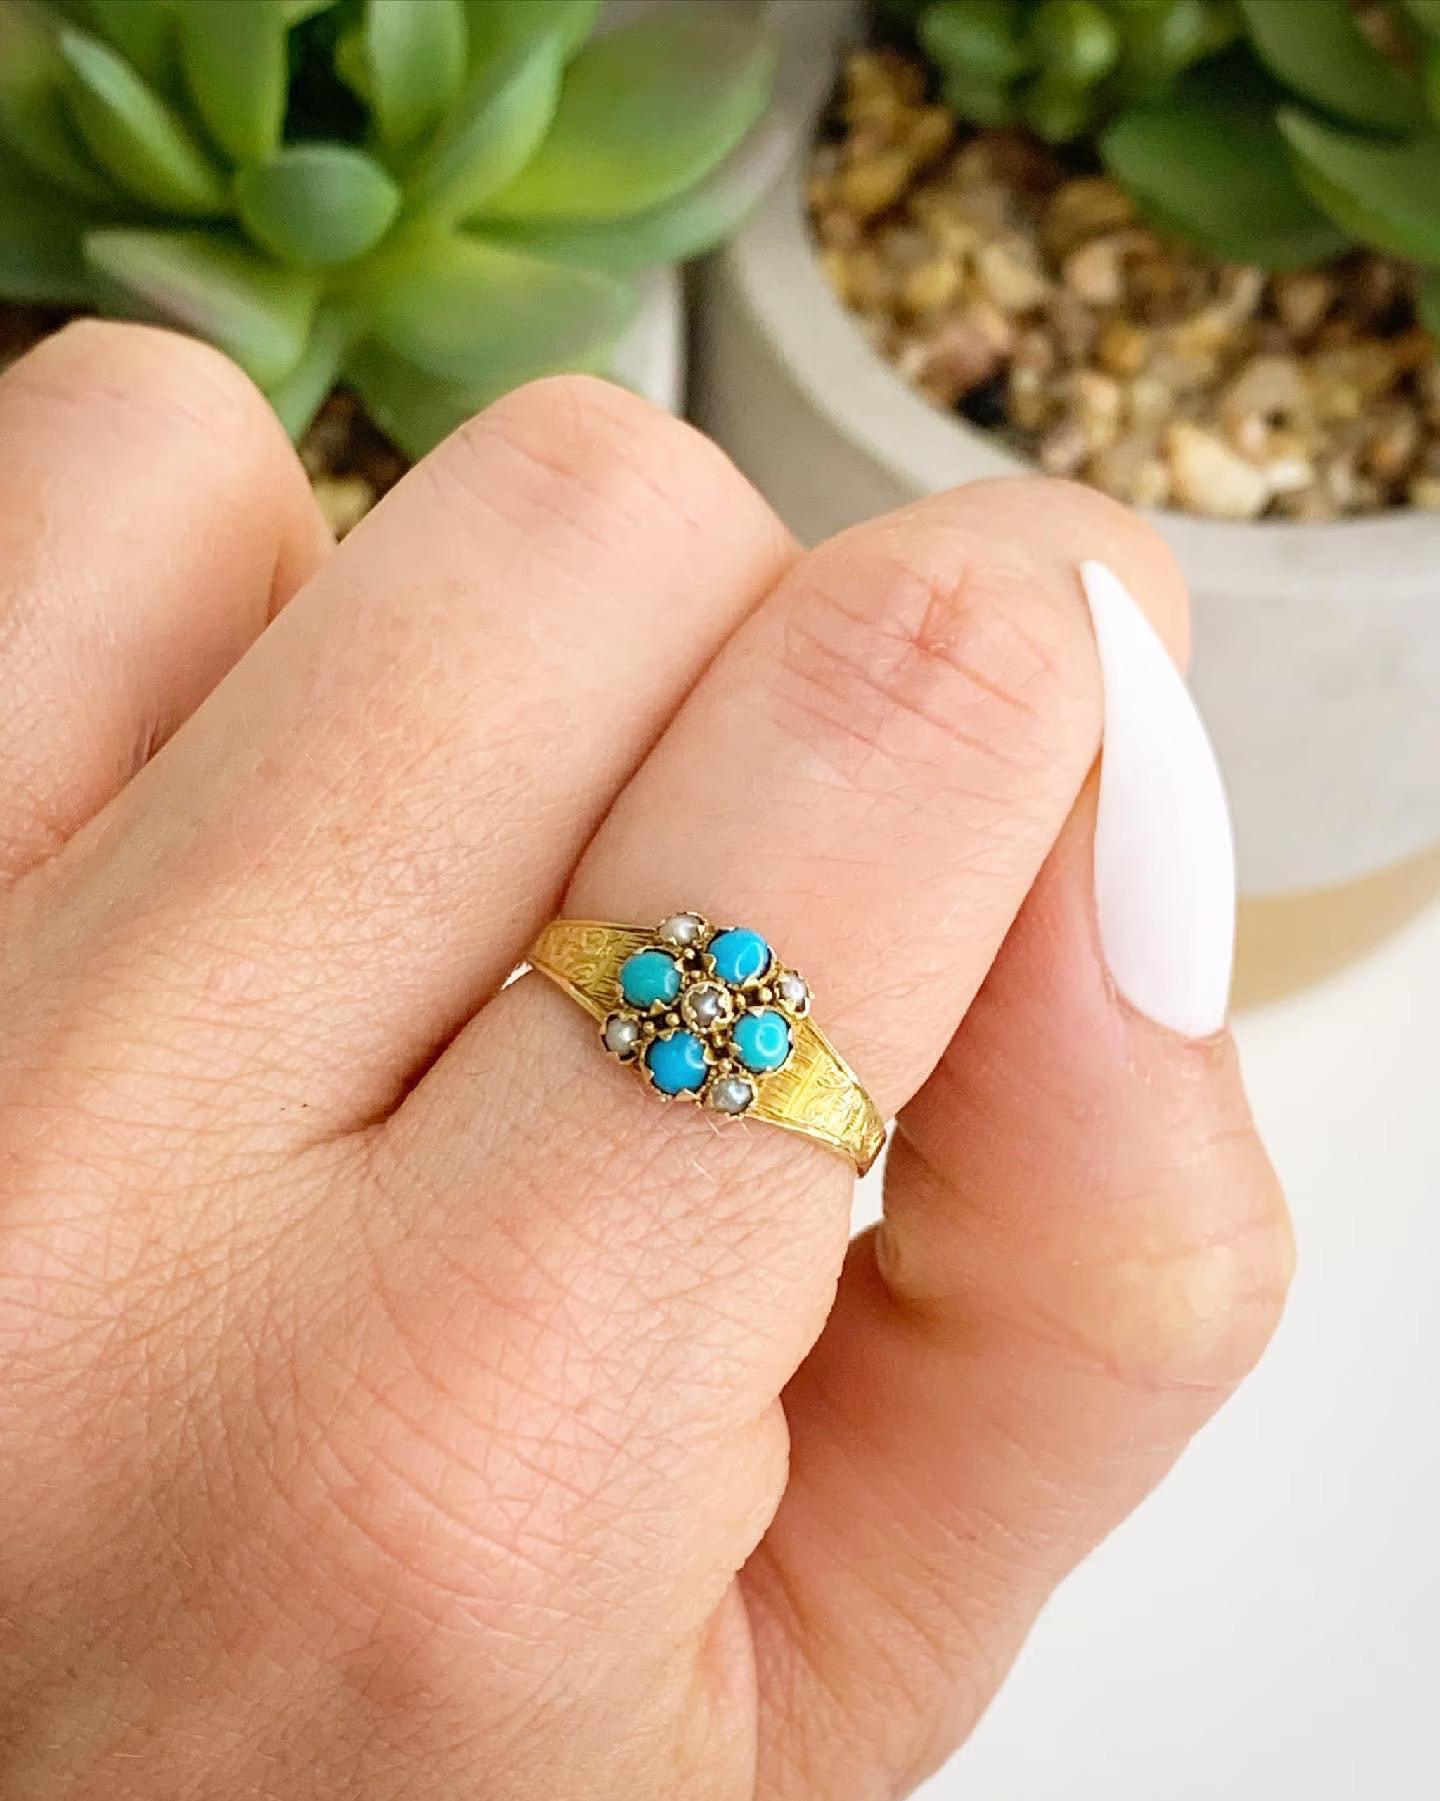 Antique Victorian 15ct Gold Turquoise & Pearl Ring Hallmarked Birmingham 1899 For Sale 1